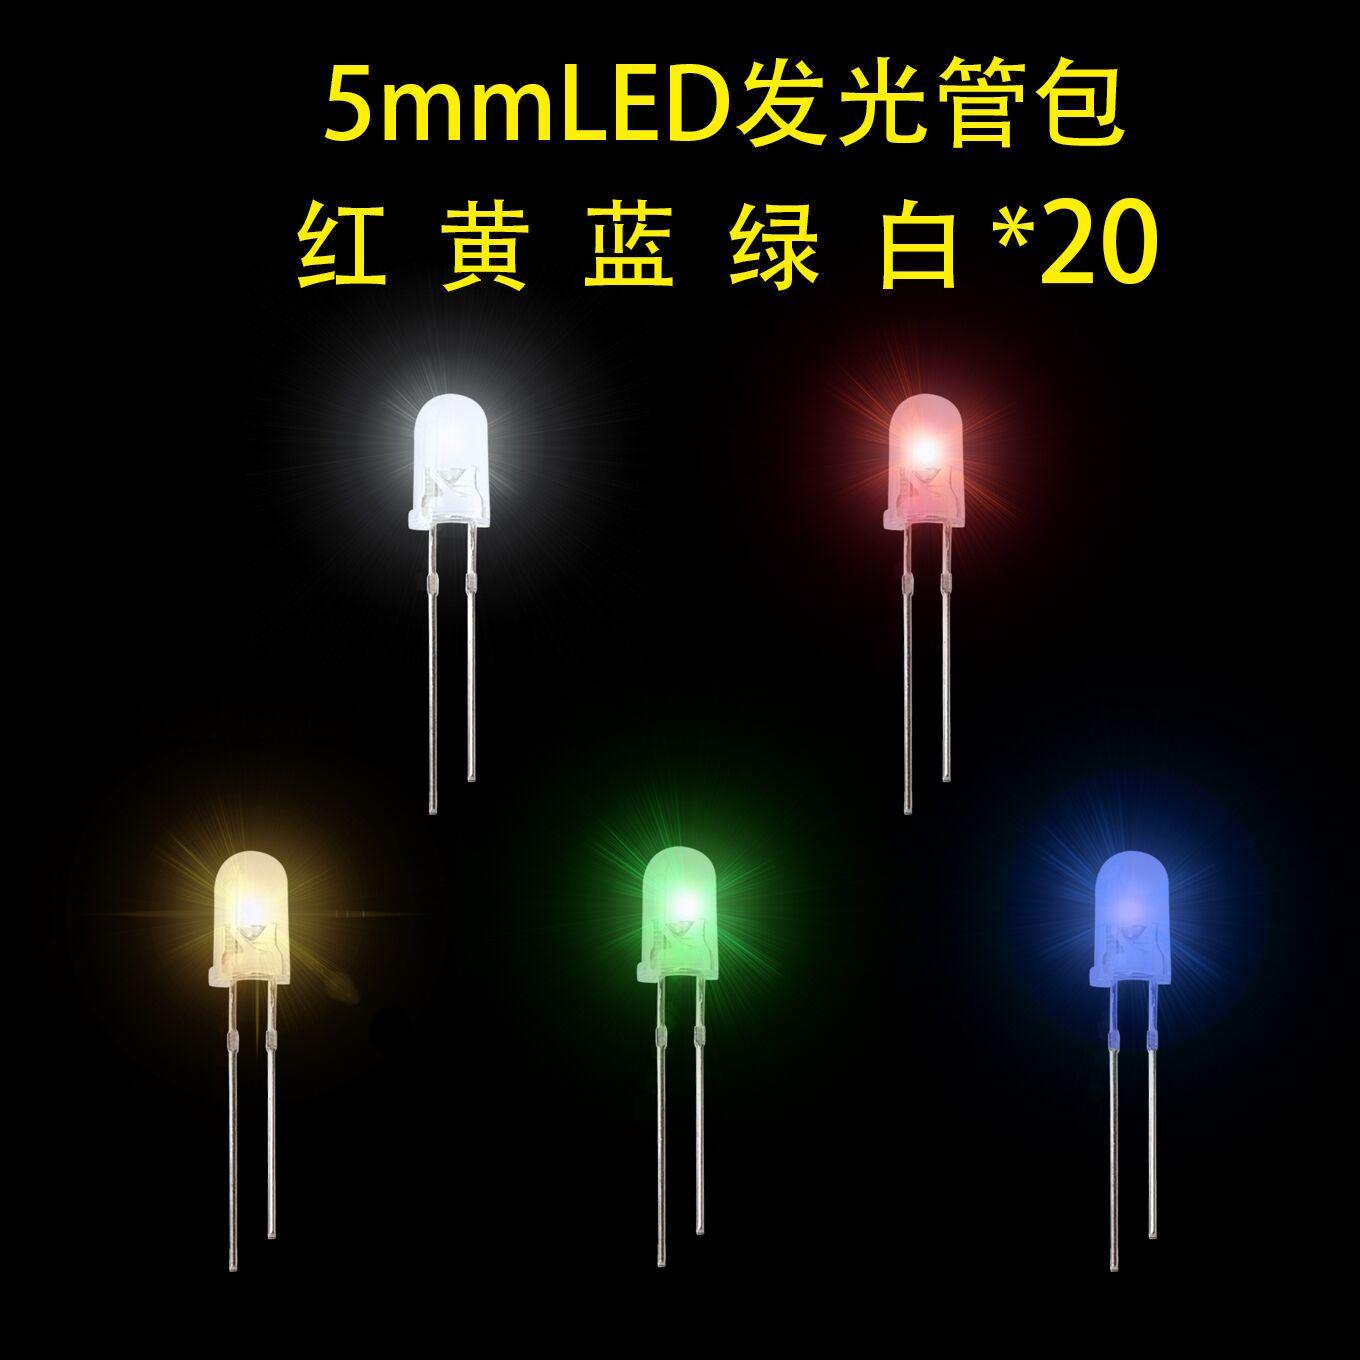 5 colors x100pcs =500pcs New 5mm Round Super Bright Led Red/Green/Blue/Yellow/White/ Water Clear LED Light Diode kit